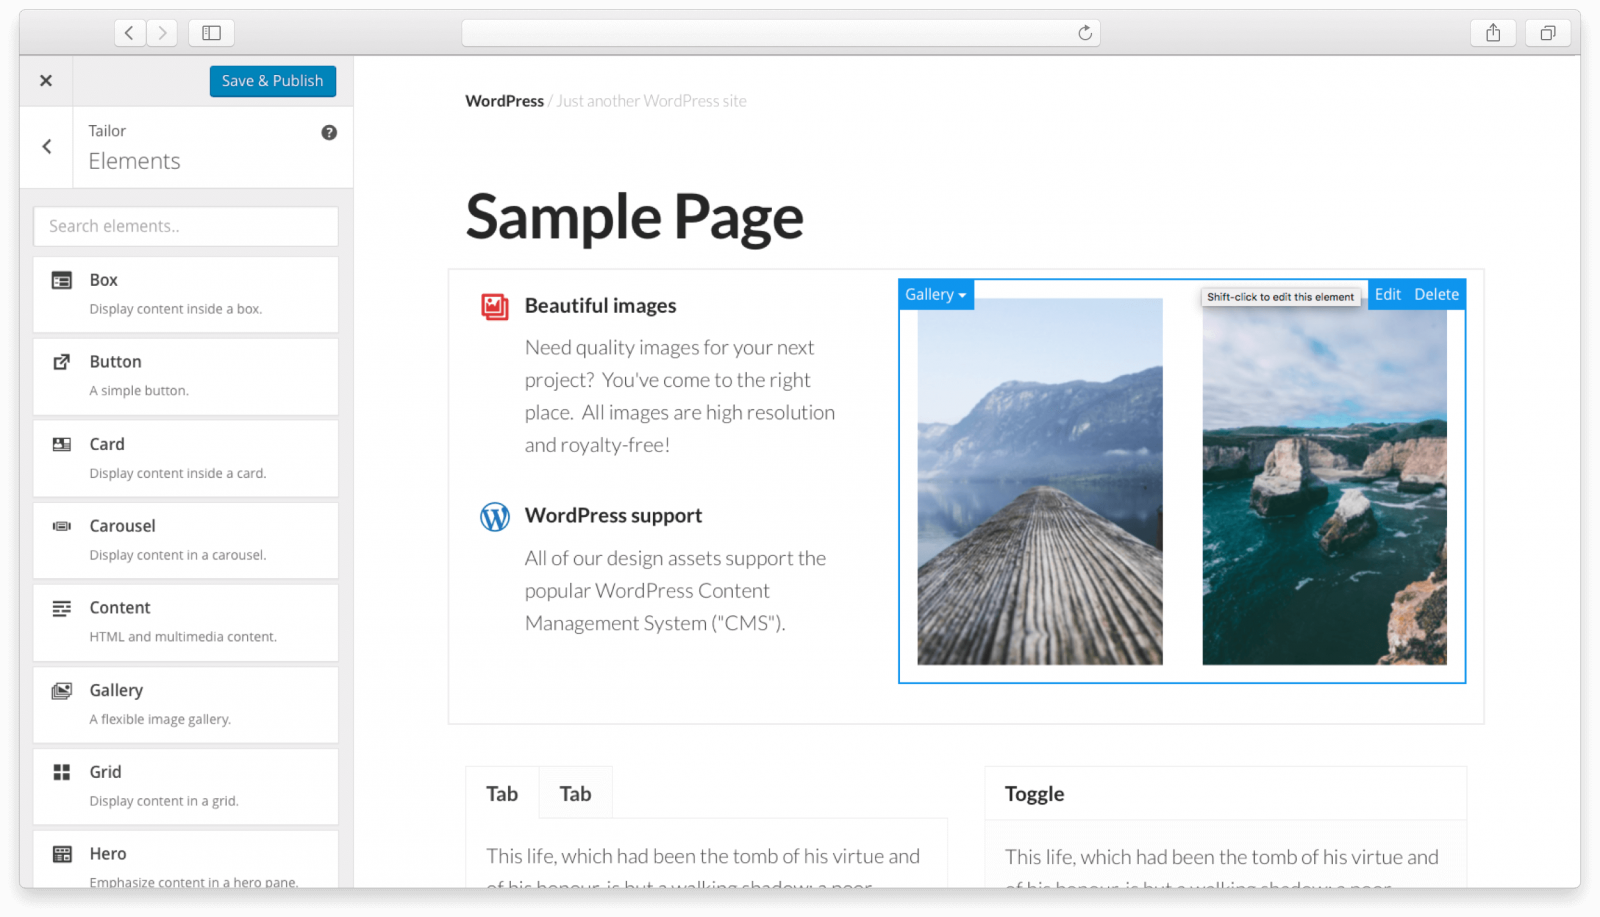 Tailor Page Builder Plugin Discontinued, Owners Cite Funding, Gutenberg, and Competition